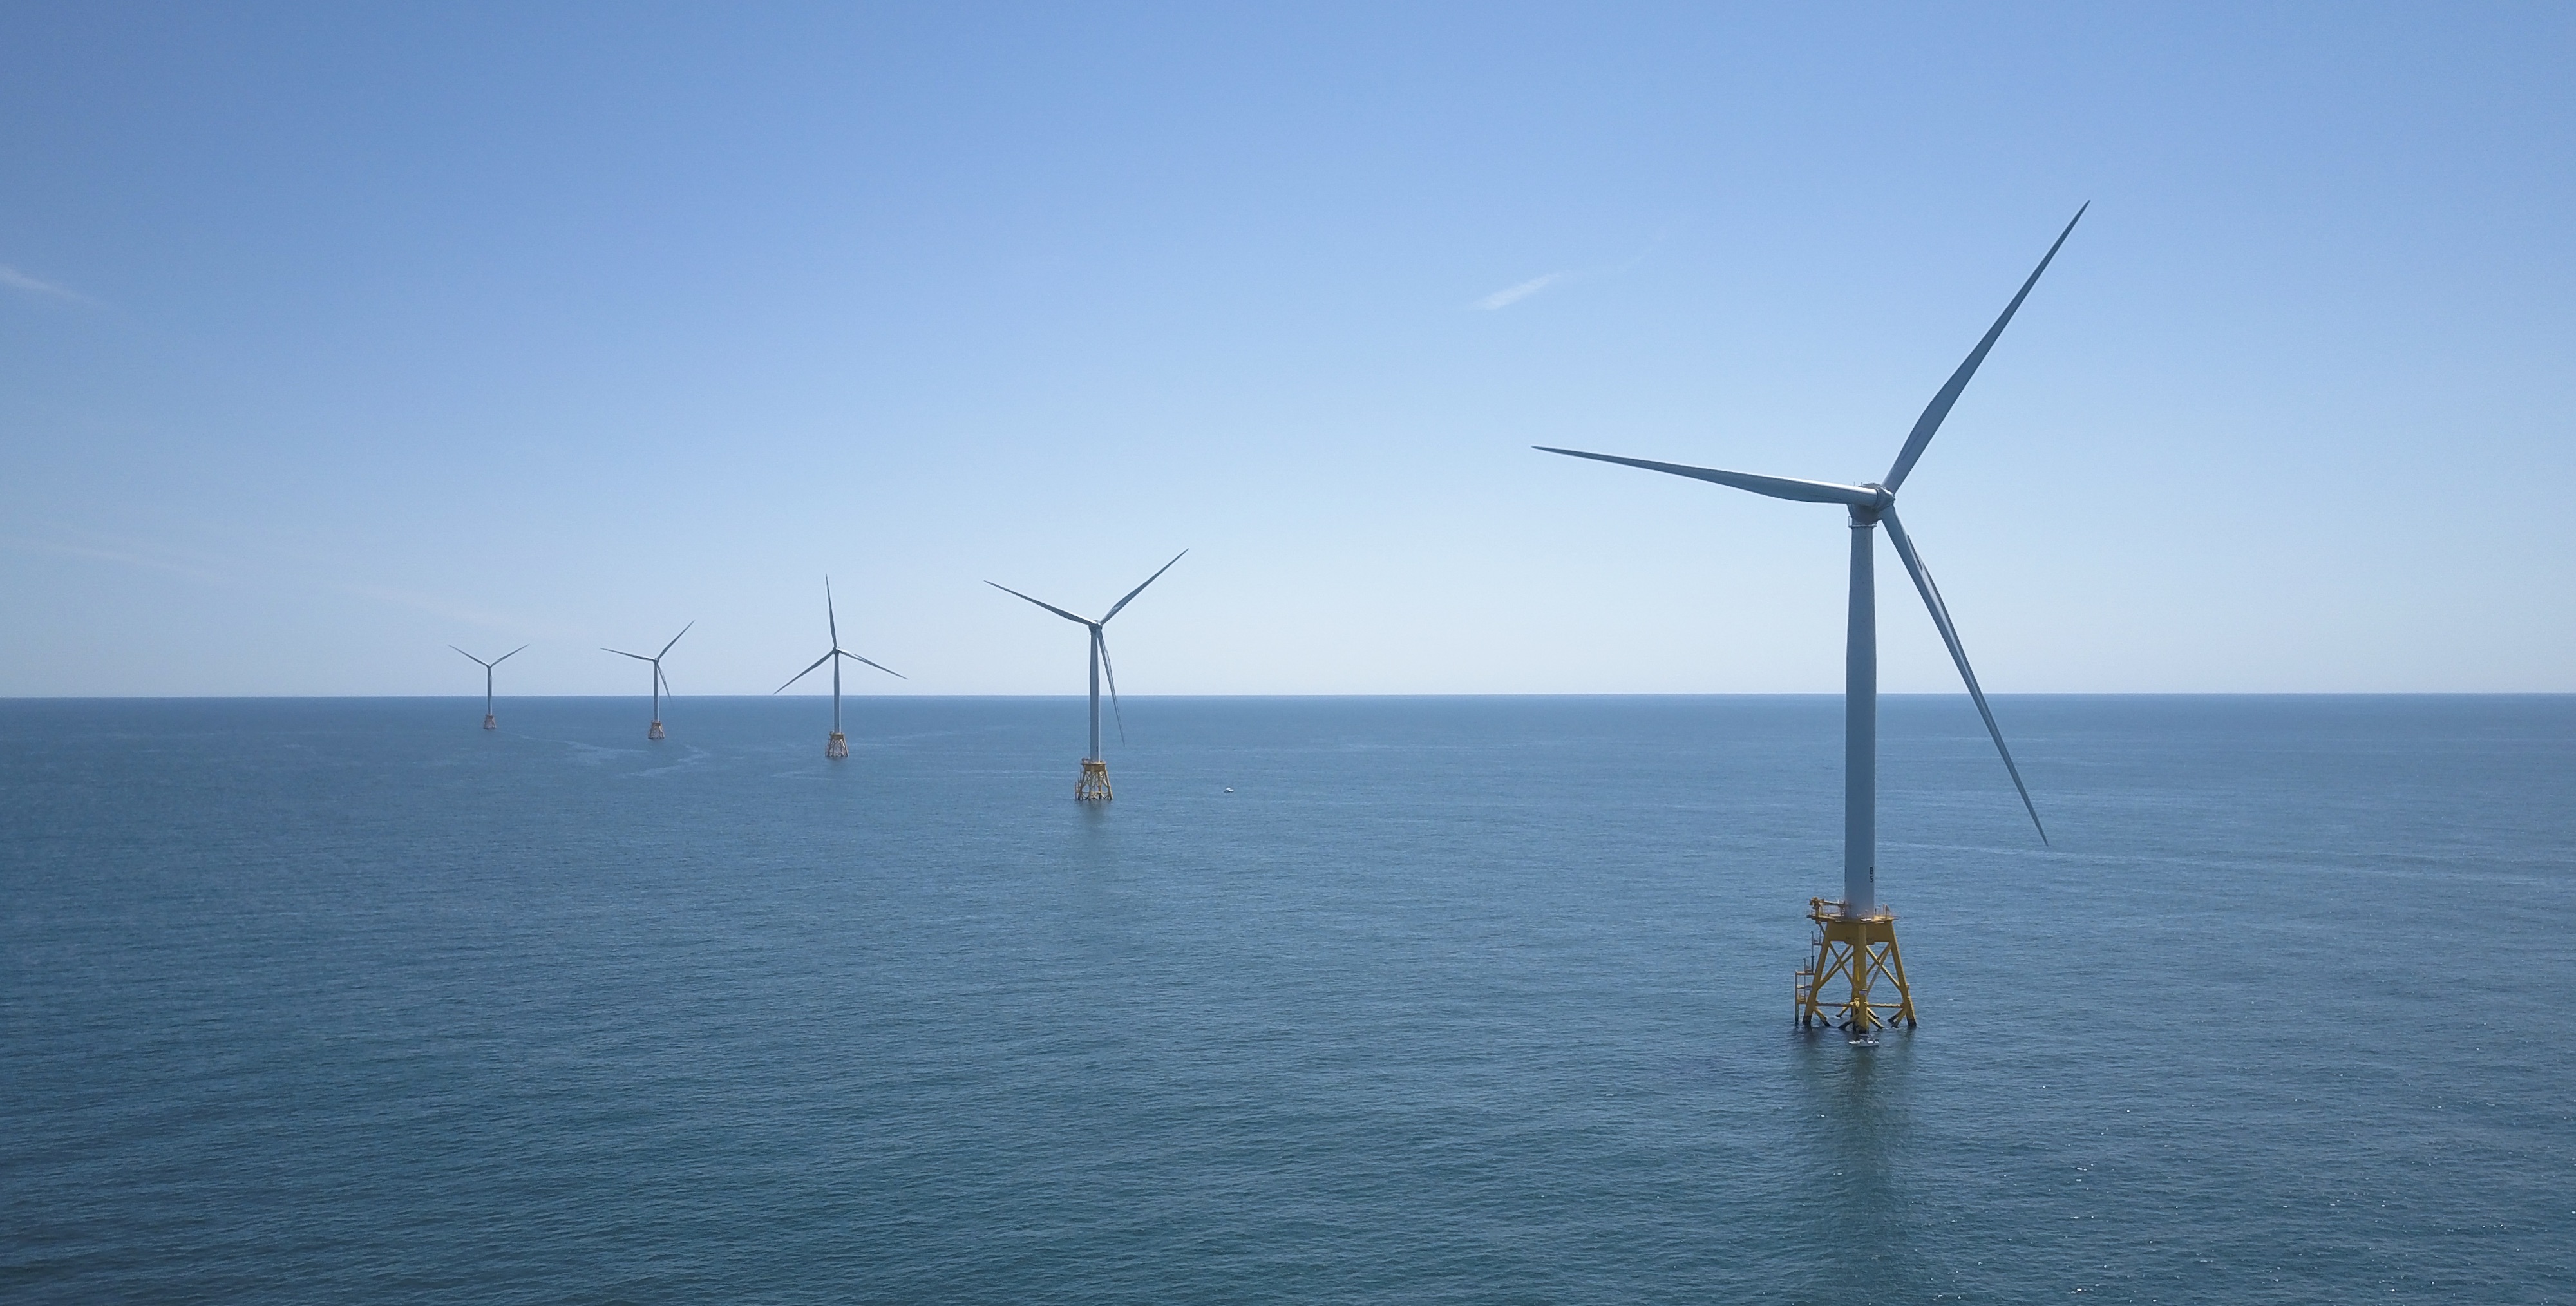 A view of five offshore wind energy turbines, with the right-hand turbine in the foreground stretching to the left-most turbine in the background. They sit on blue ocean water against a blue sky. 